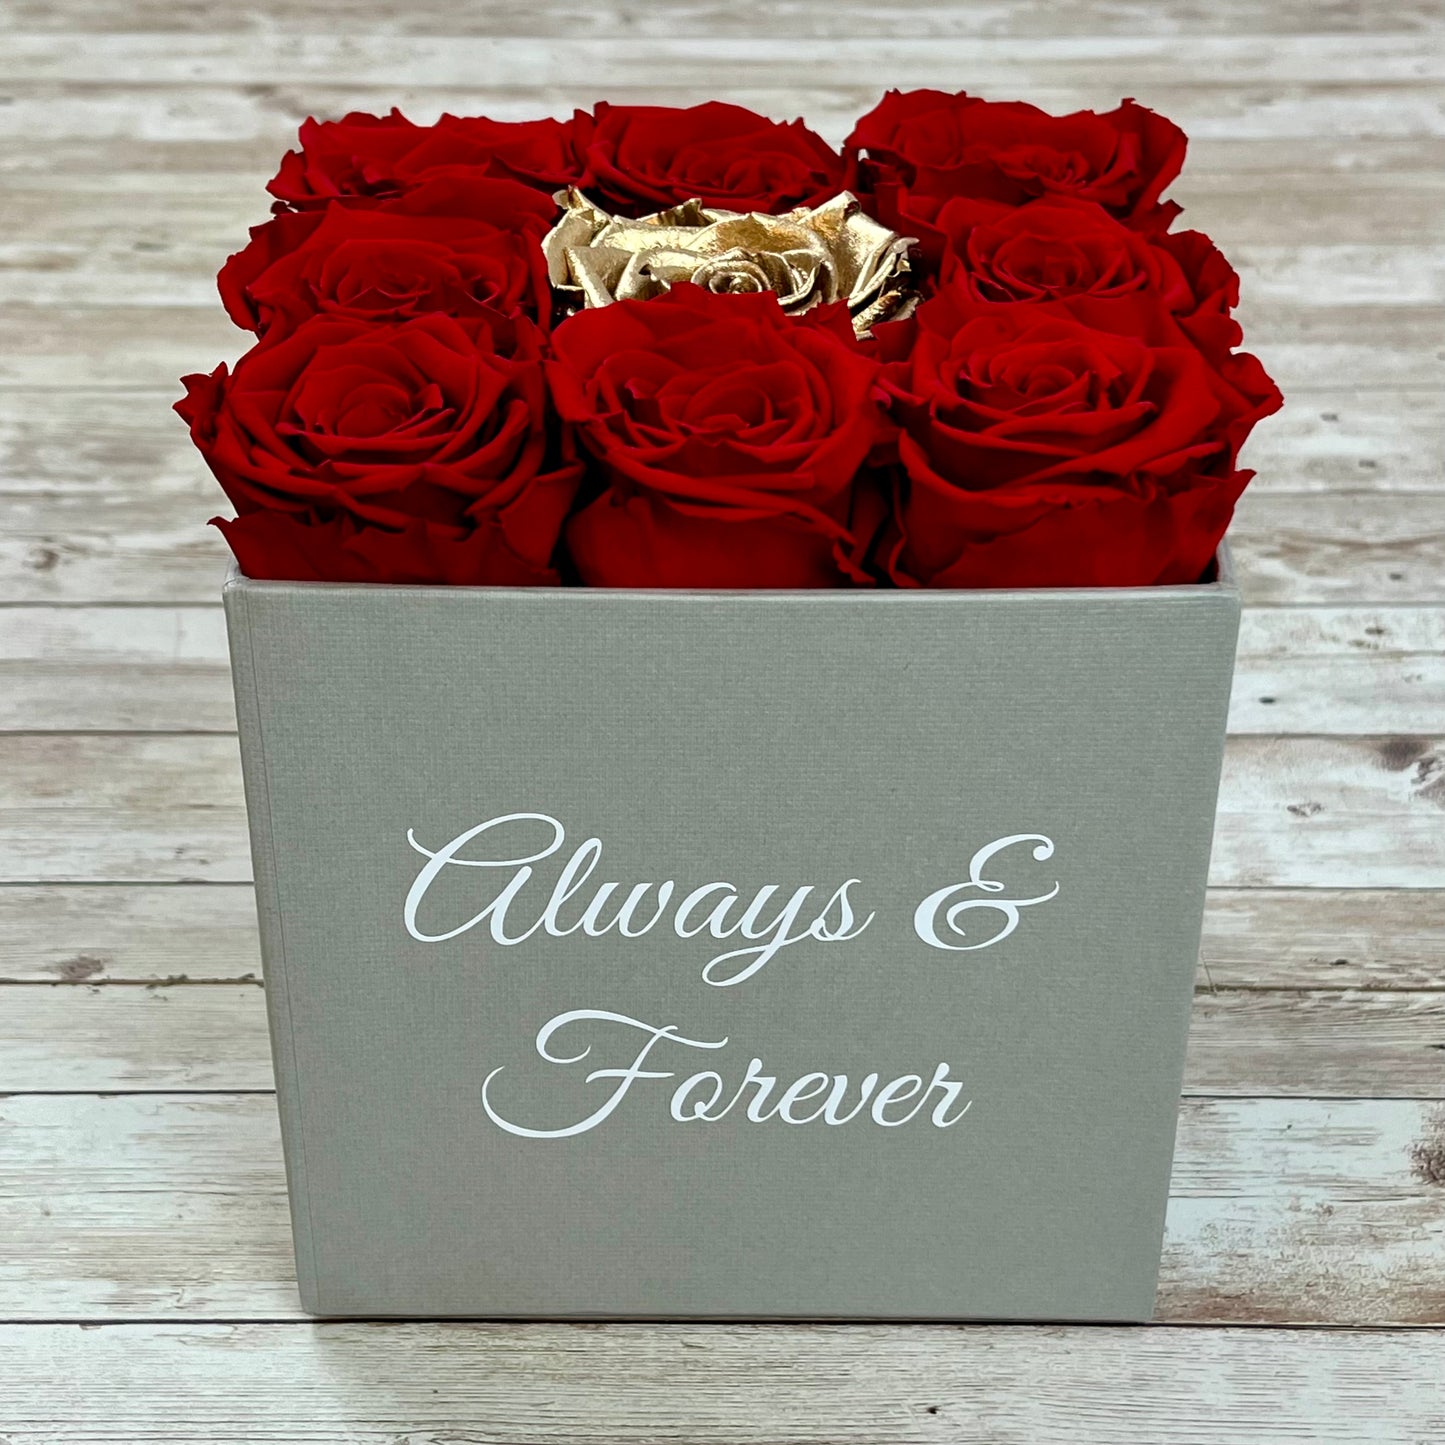 Grey Square Infinity Rose Box - Infinity Roses - Red & Gold One Year Roses - Square Box of Roses- Rose Colours divider-Red with Gold centre